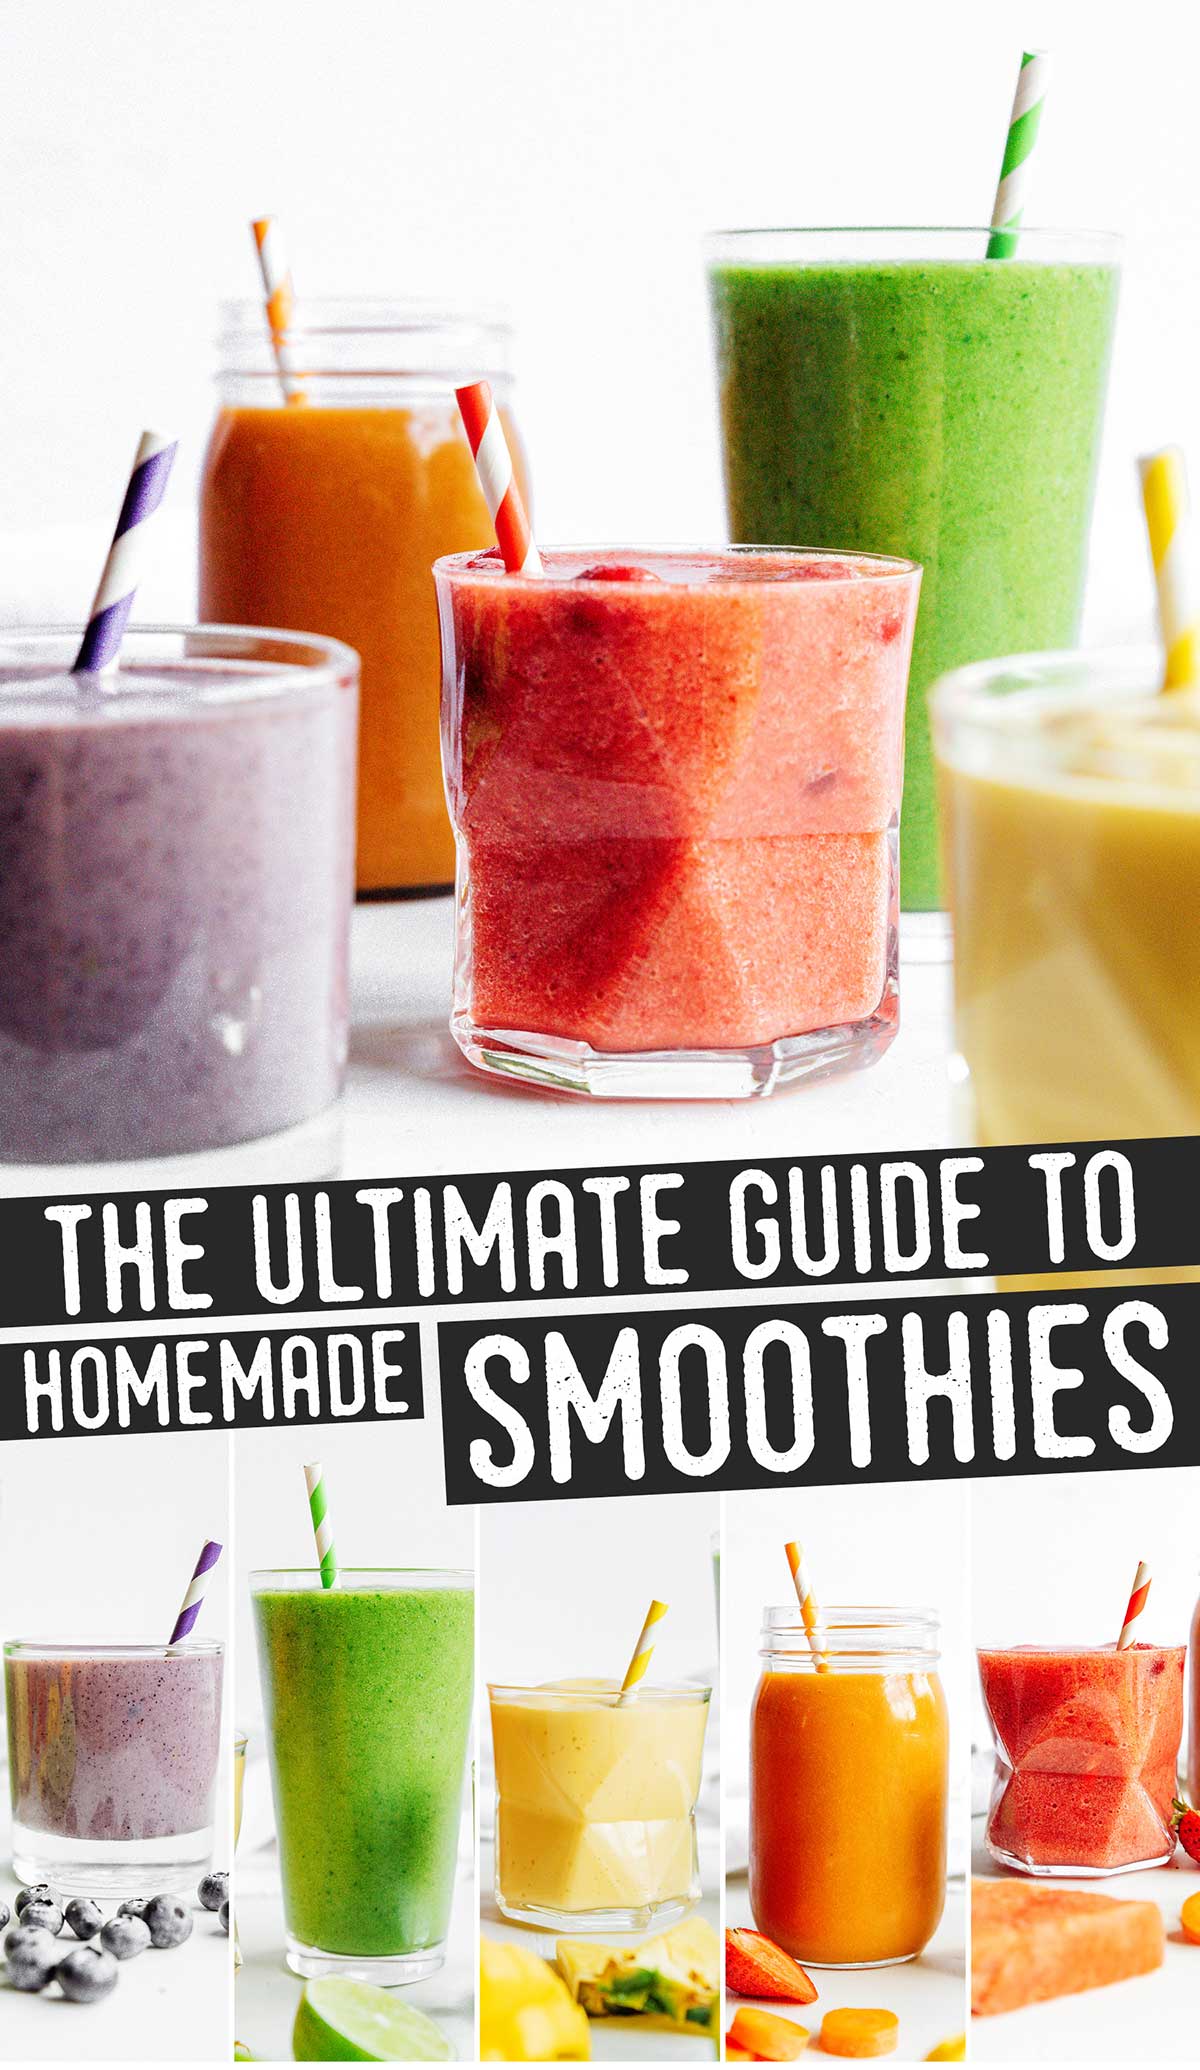 How To Make A Smoothie (The Ultimate Guide!) | Live Eat Learn